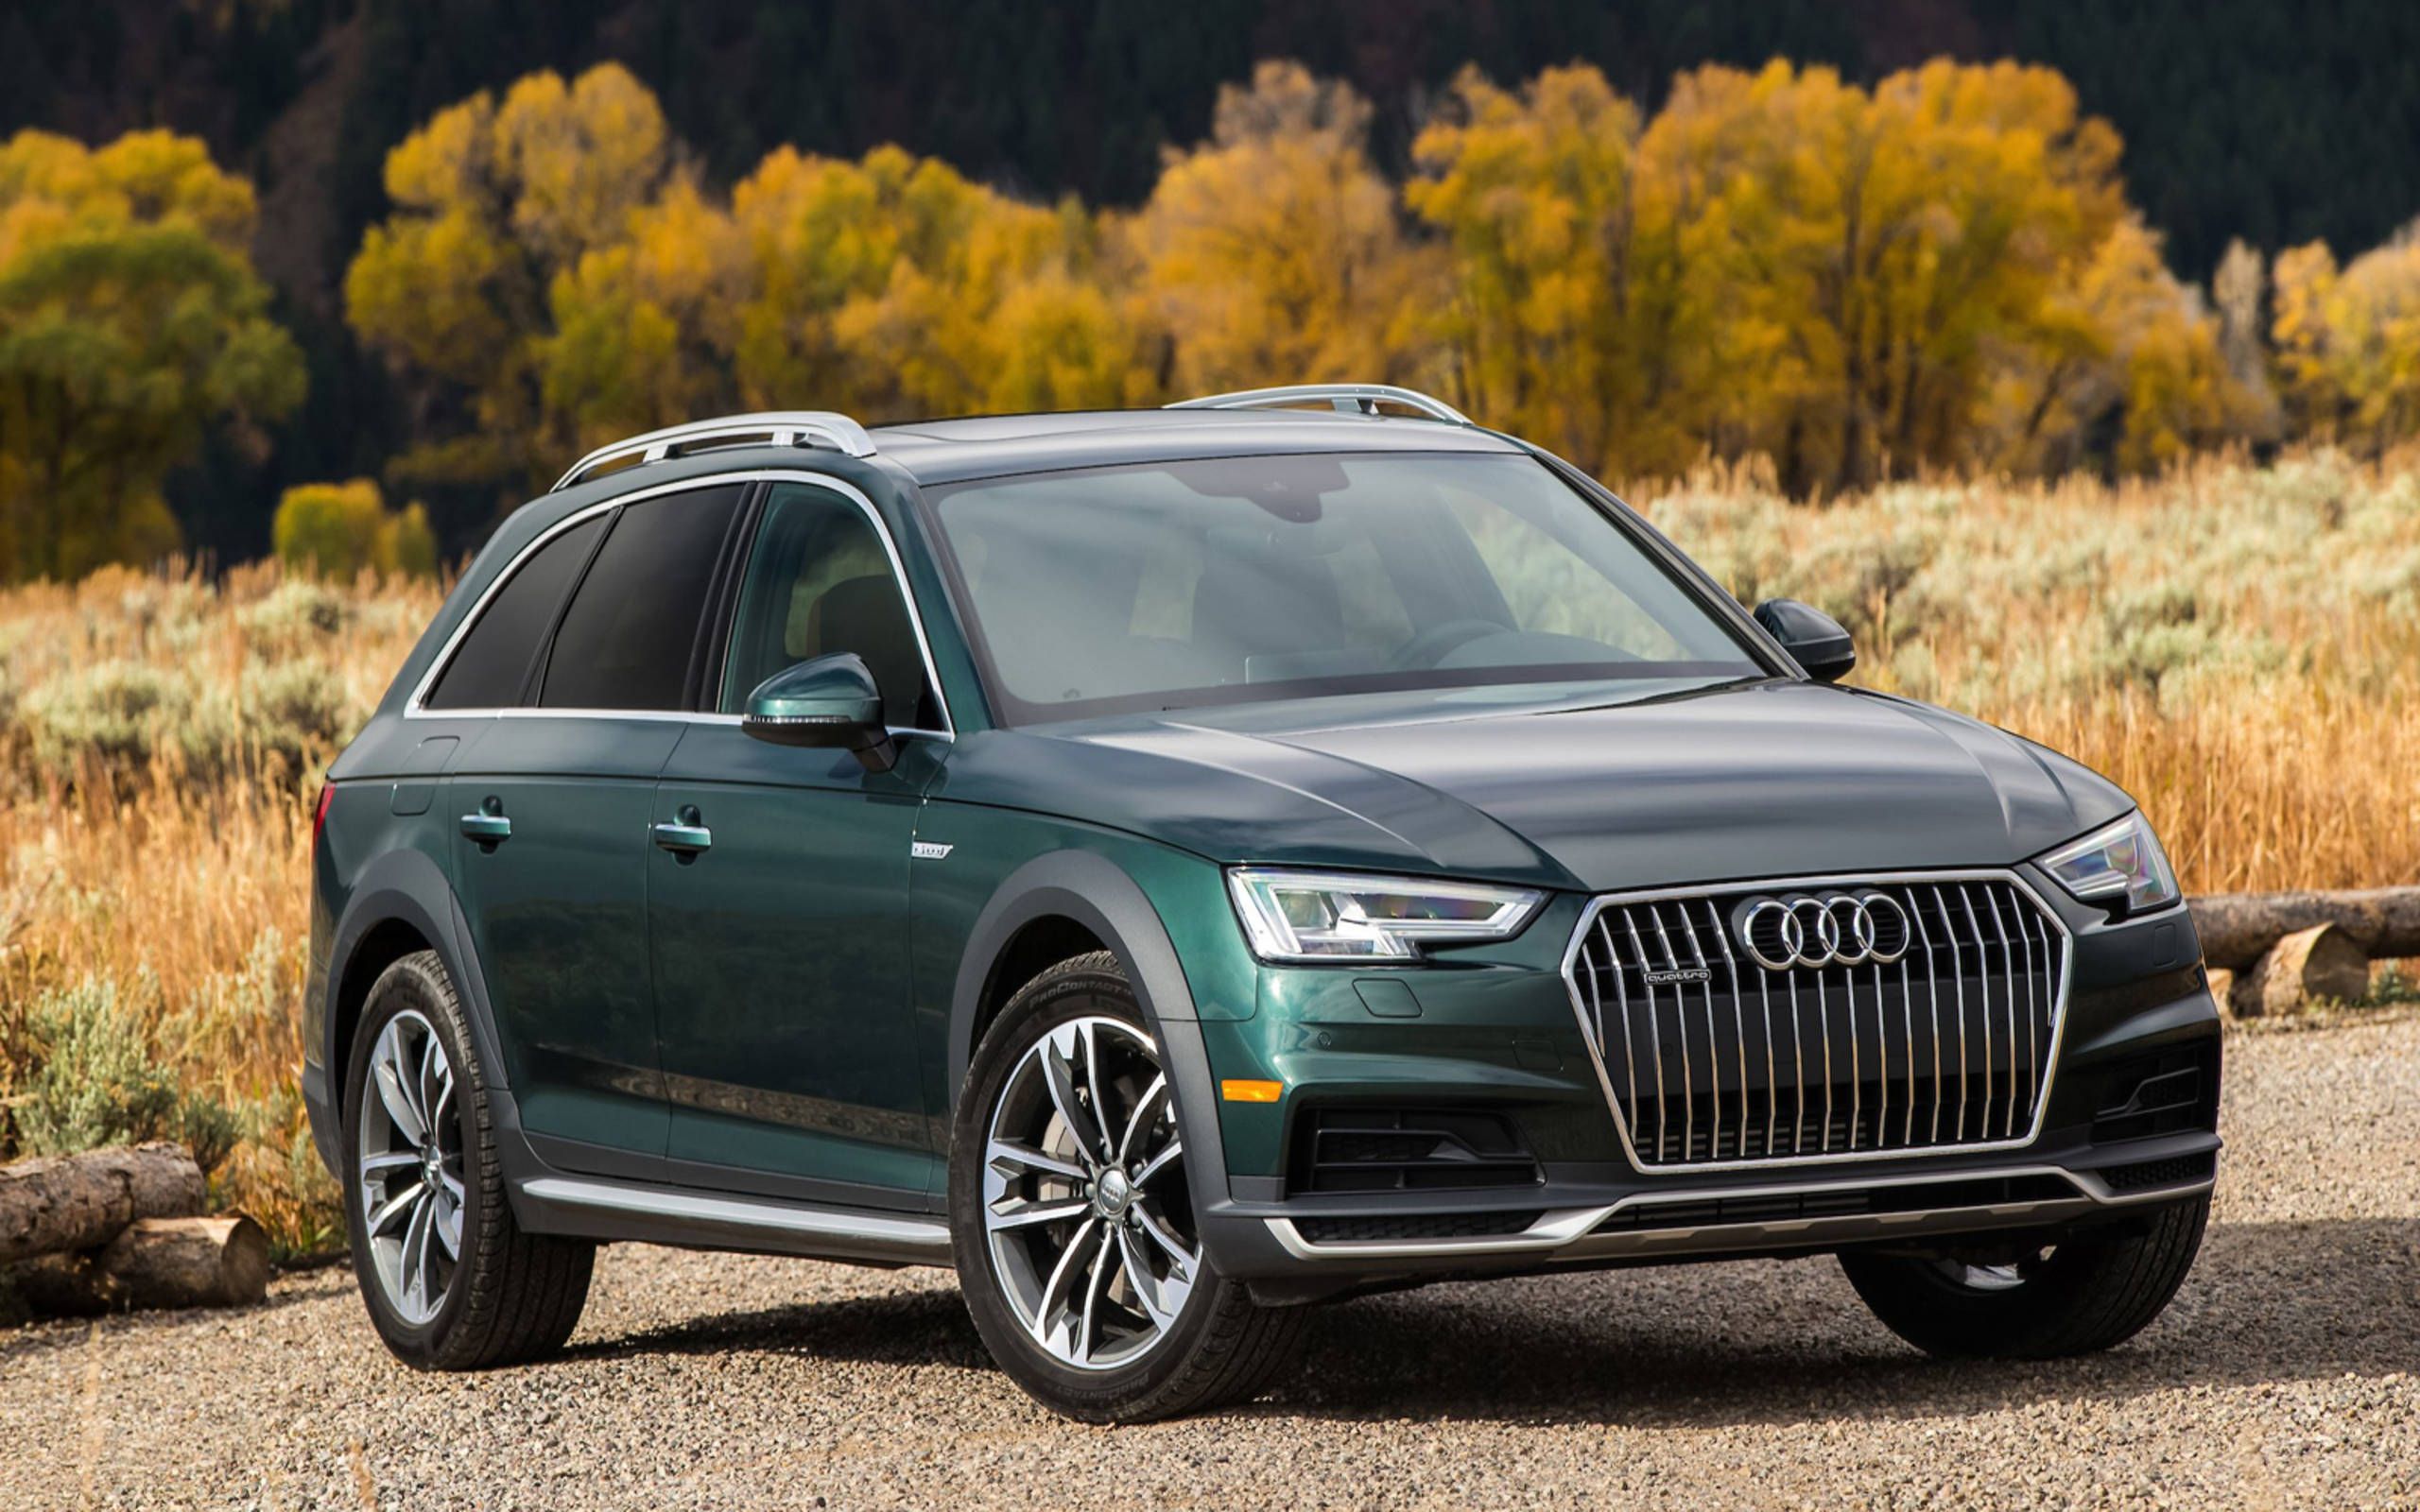 2017 Audi A4 Allroad review: Skip the SUV, get a wagon